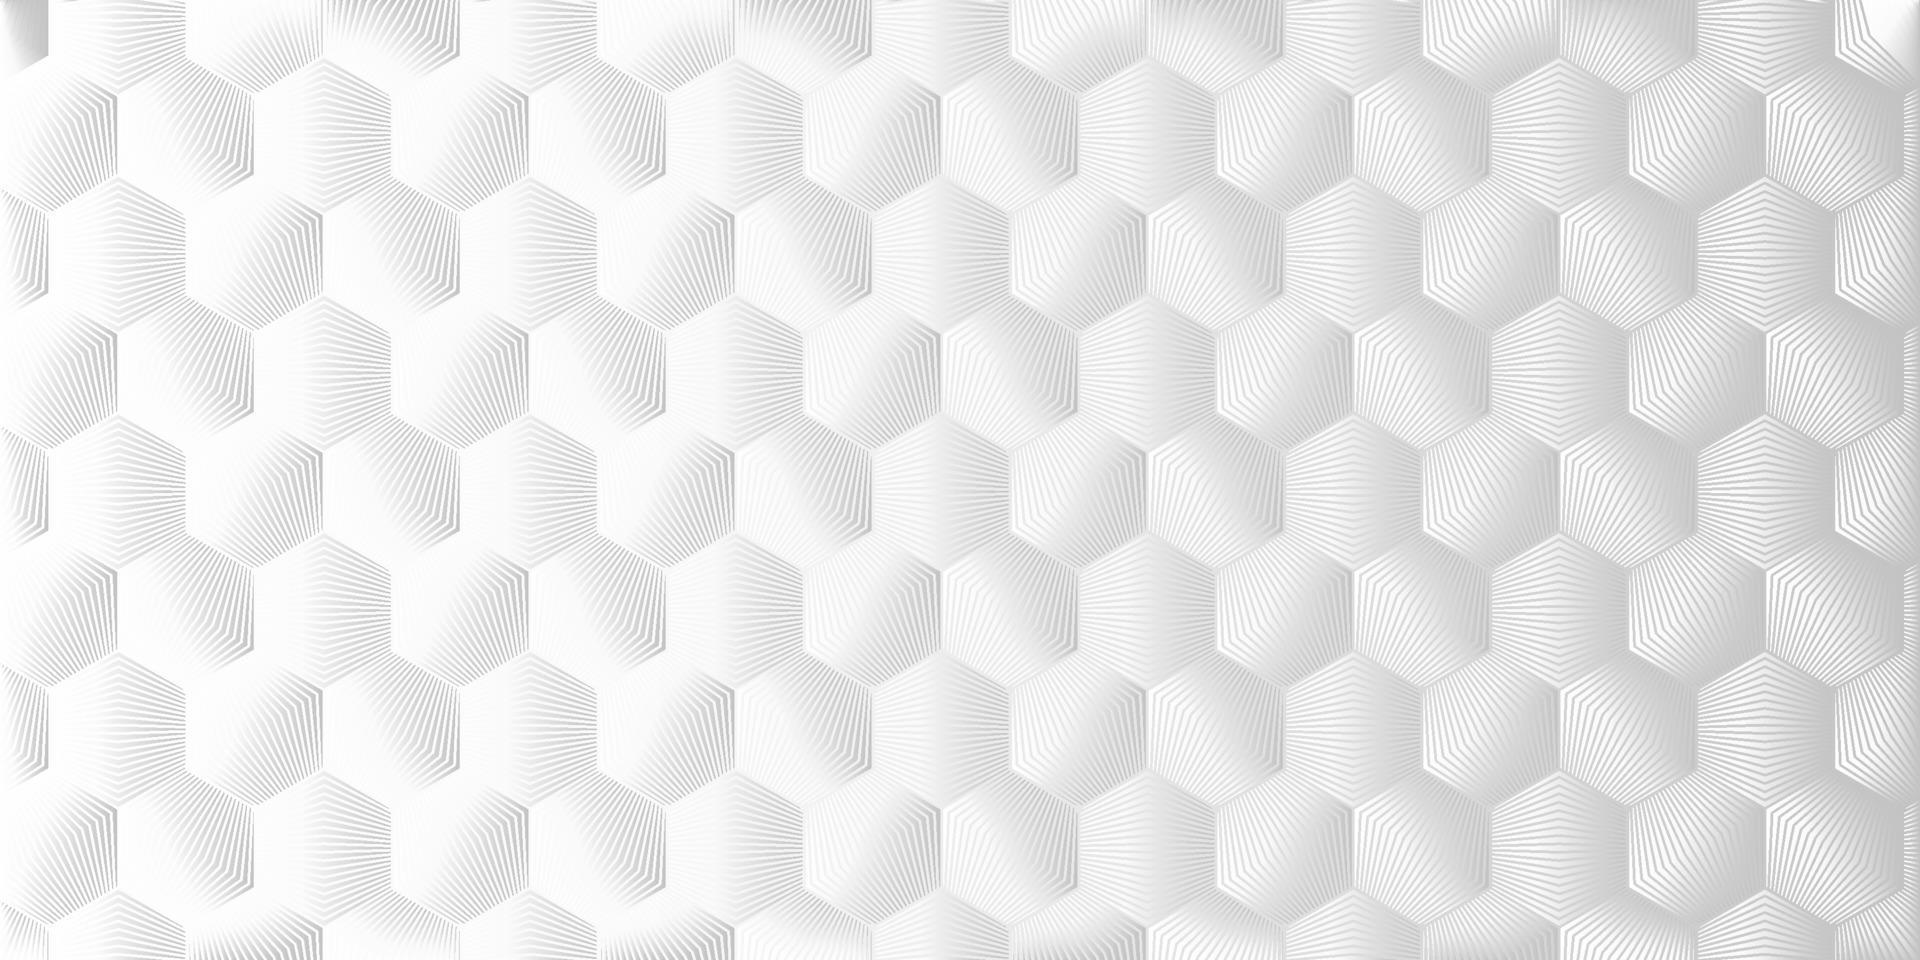 Abstract geometric pattern with striped lines white background vector